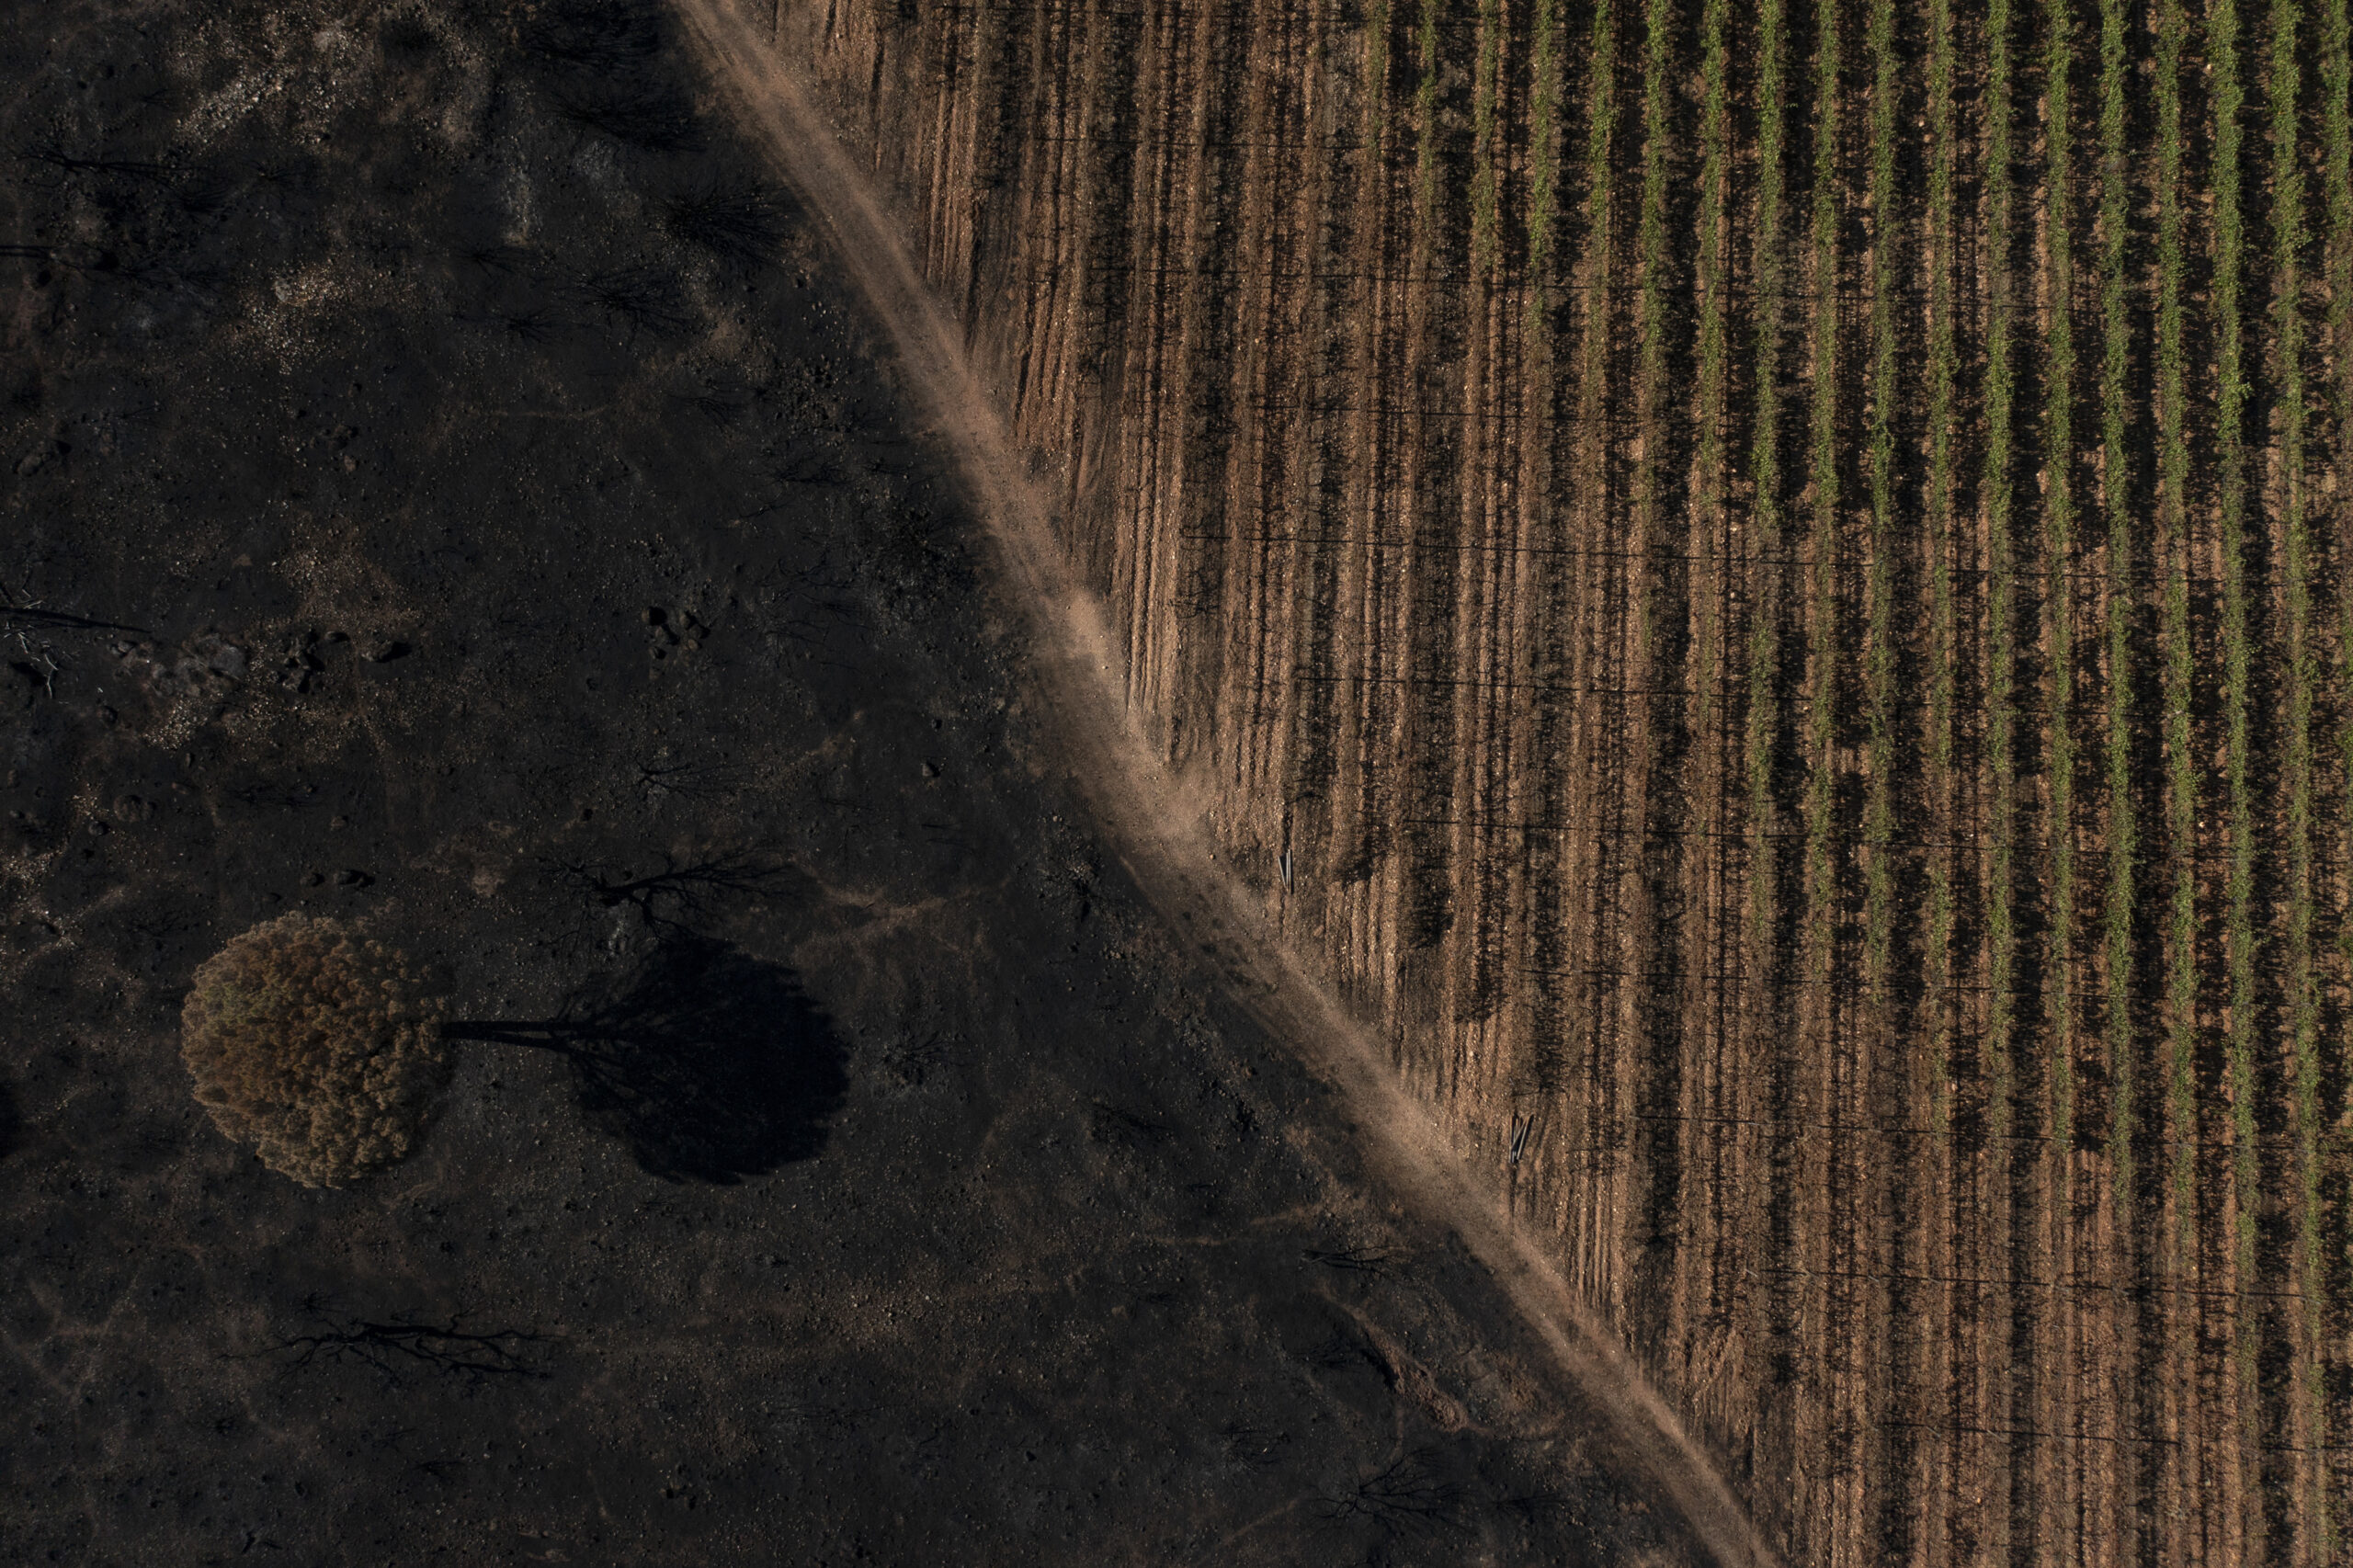 Vineyards charred by a wildfire are pictured at the Chateau des Bertrands vineyard in Cannet-des-Maures, southern France, Thursday, Aug. 26, 2021. Winemakers near the French Riviera are taking stock of the damage after a wildfire blazed through a once picturesque nature reserve near the French Riviera. The blaze left two people dead, more than 20 injured and forced some 10,000 people to be evacuated. (AP Photo/Daniel Cole)